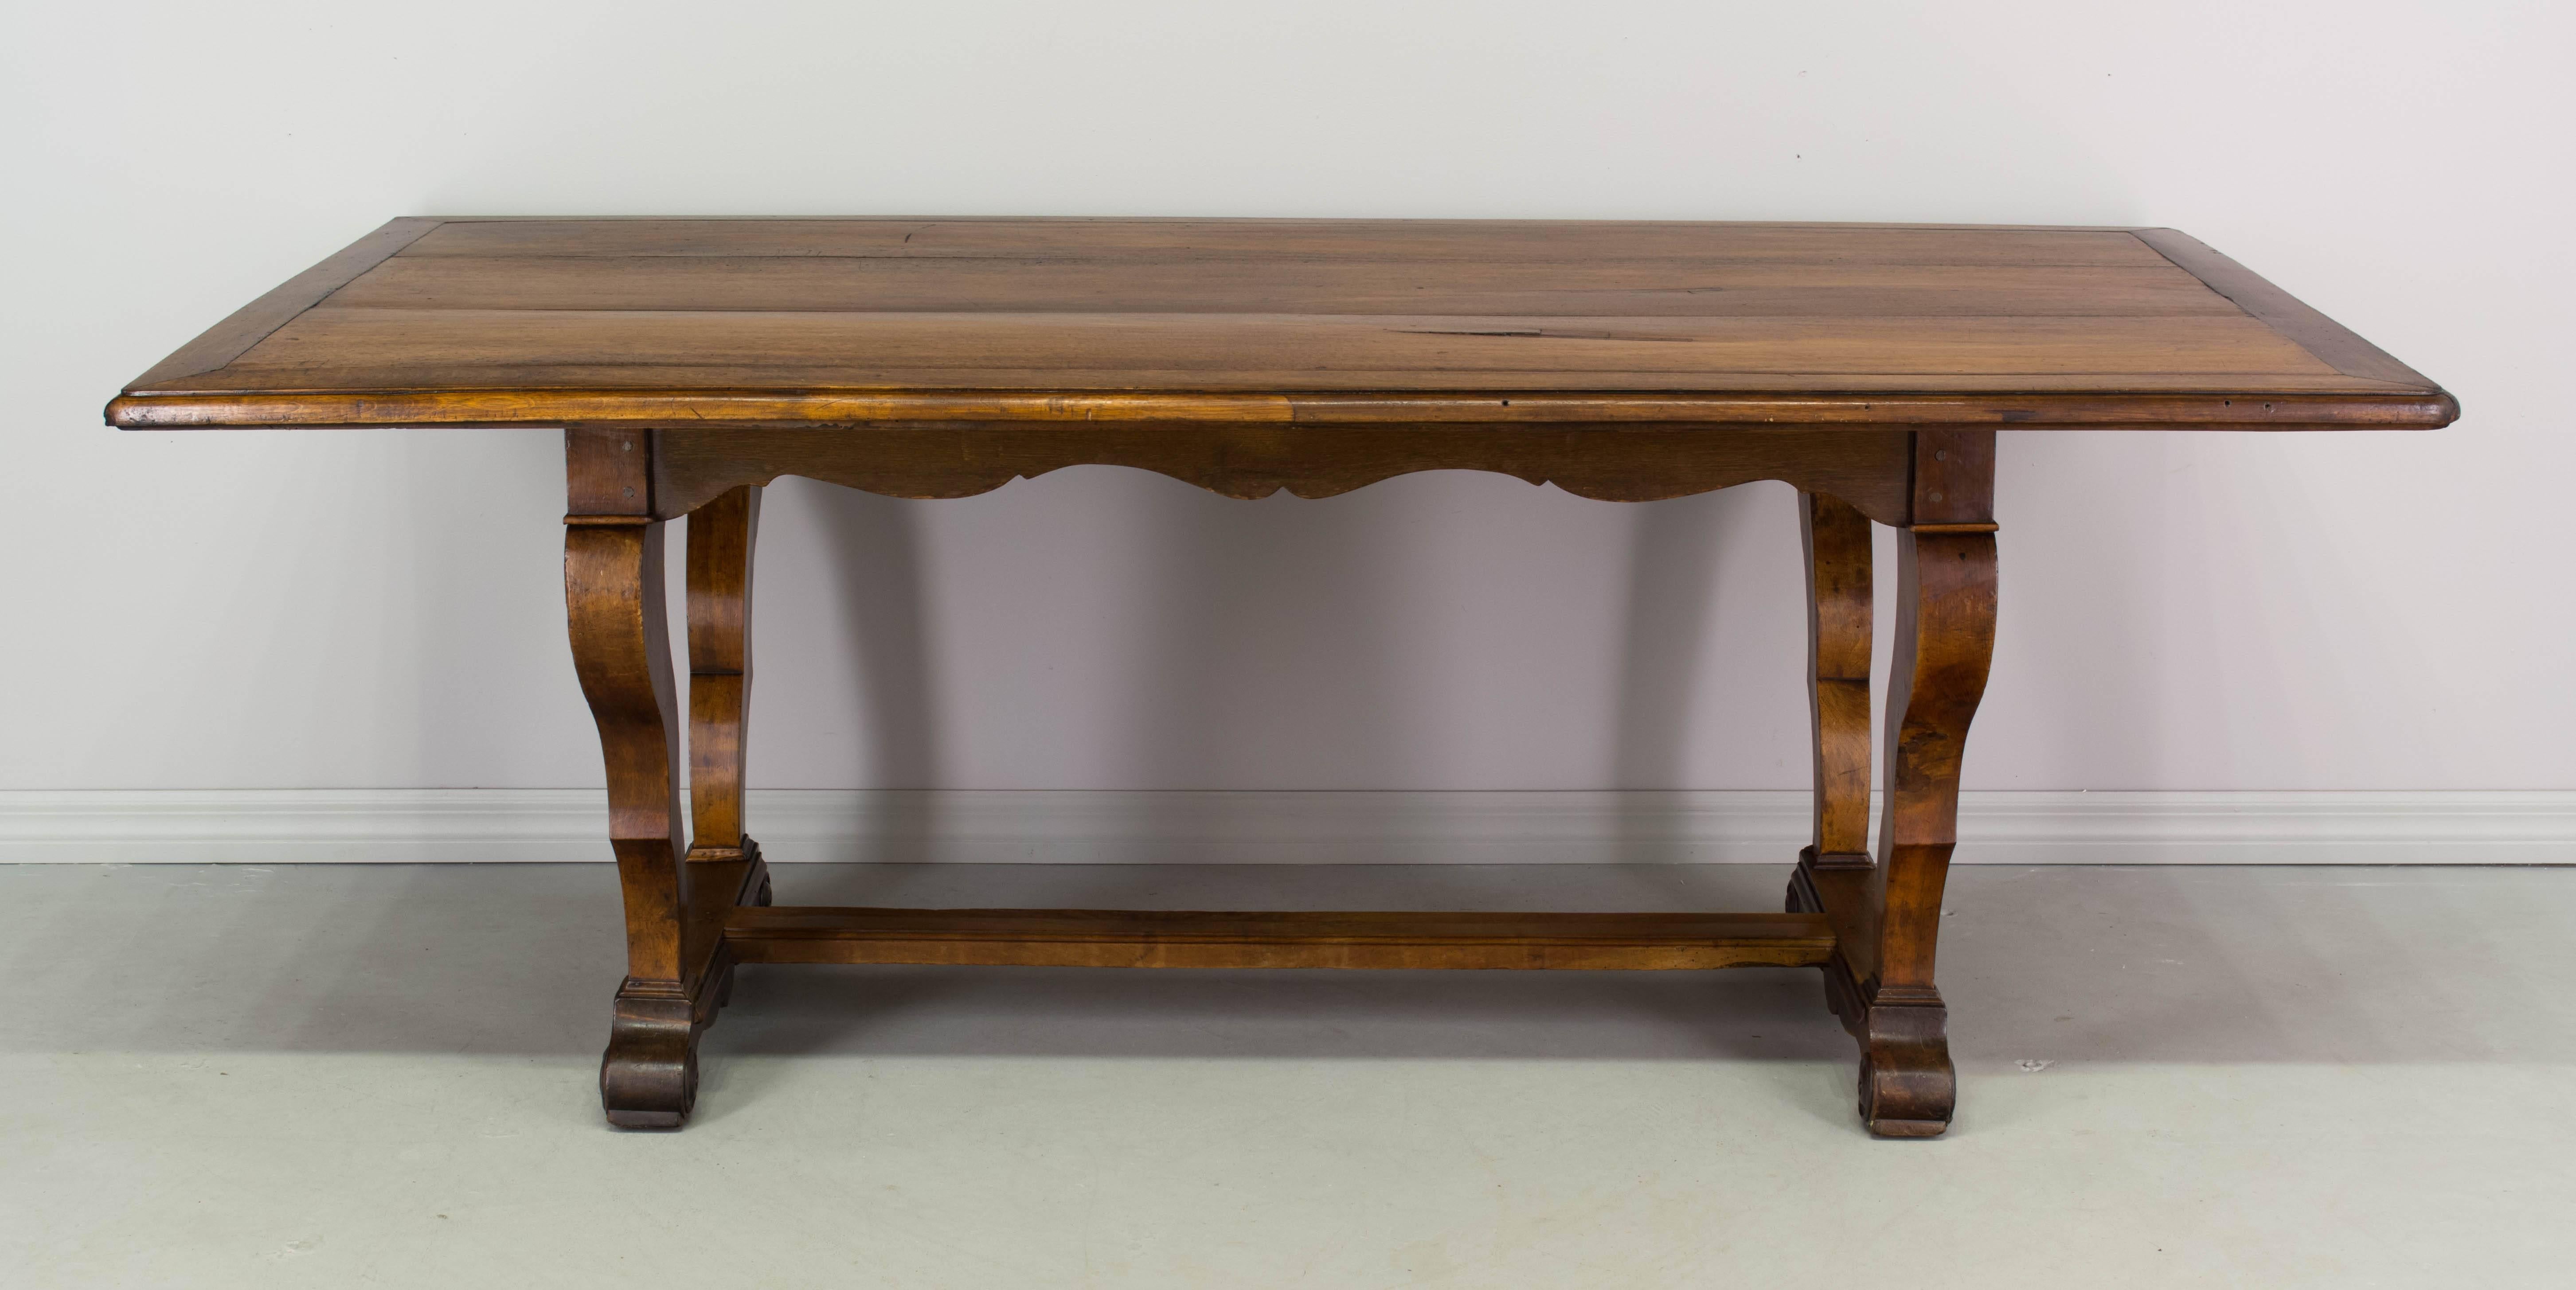 19th century Country French dining table made of solid walnut. The top is made of three planks surrounded with a border and may be removed for shipping purposes.
The base is very sturdy, with sculptural curved legs, a scalloped apron and a central